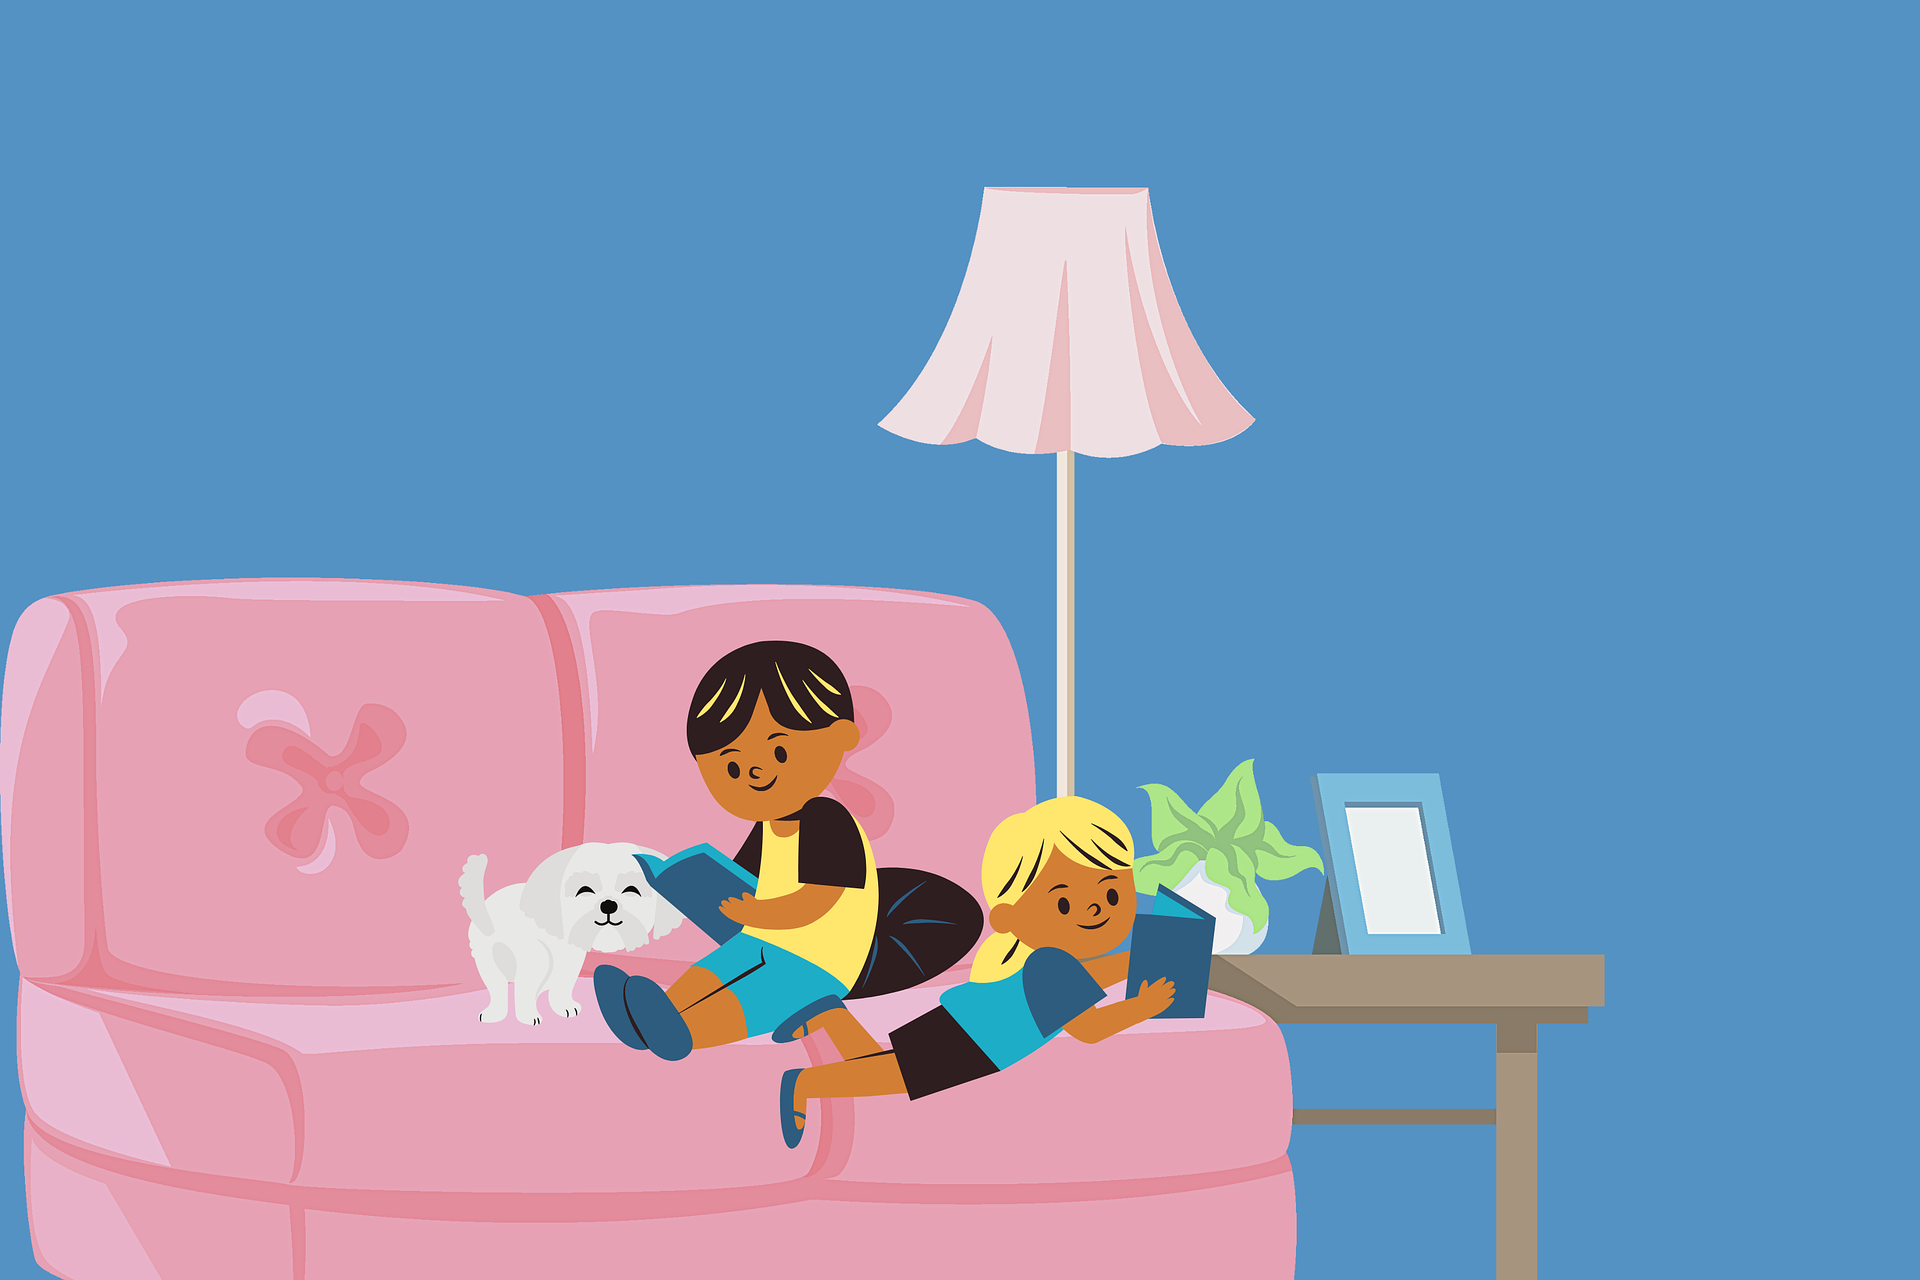 An illustrated image of two children reading in a living room on a pink couch.